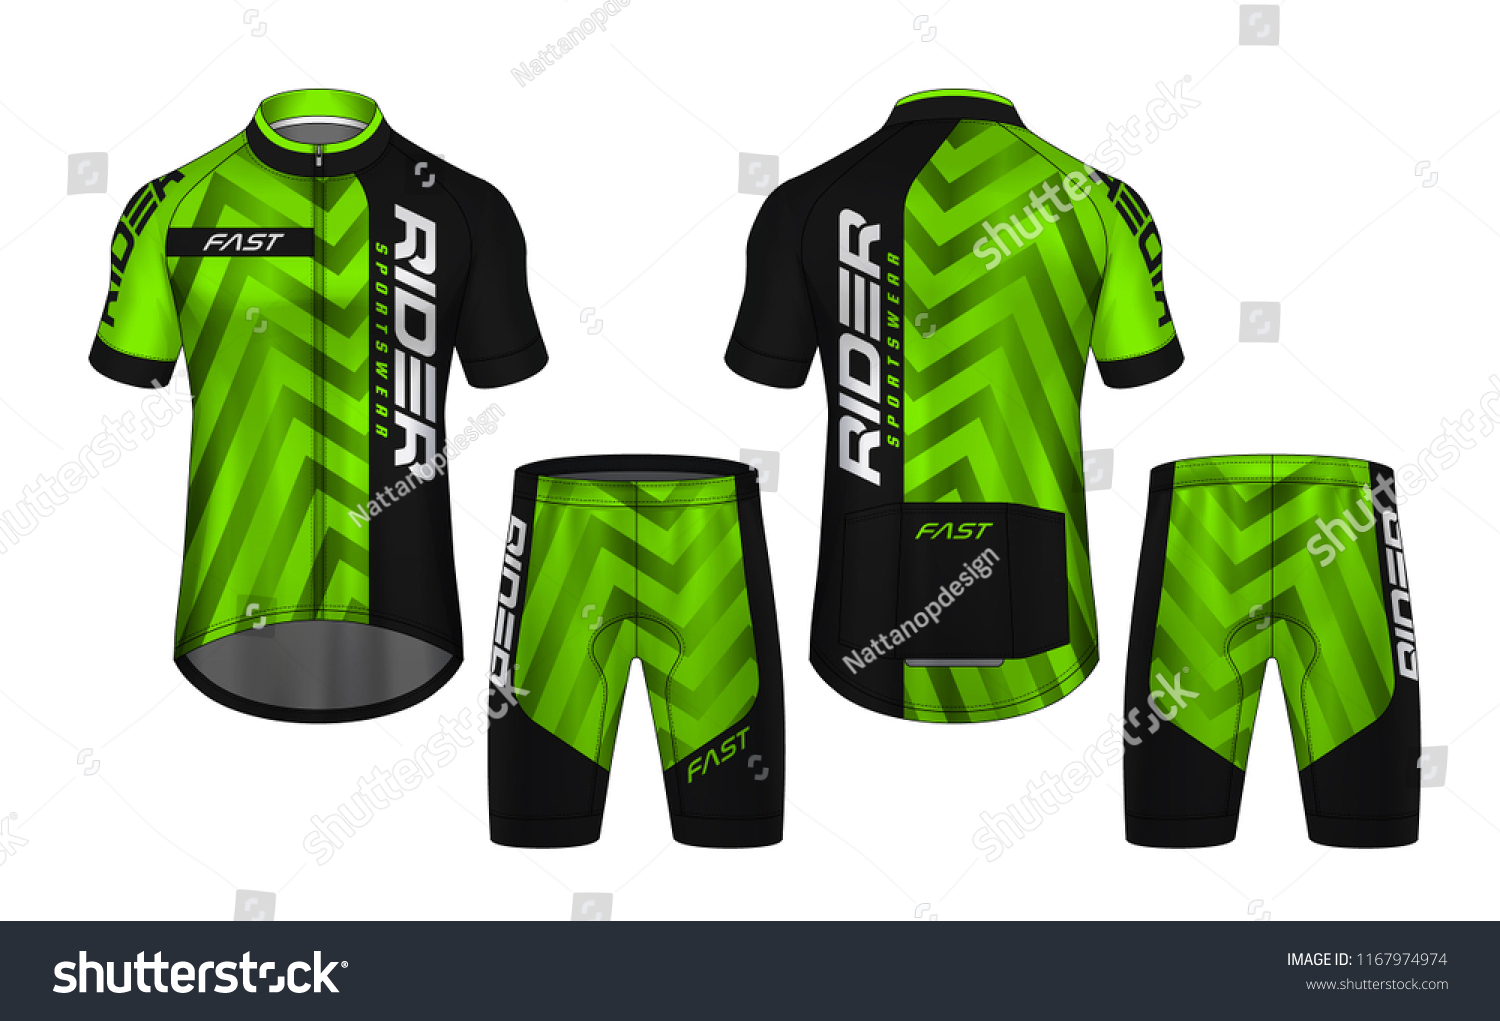 Download 45+ Template Cycling Jersey Mockup PNG Yellowimages - Free ...